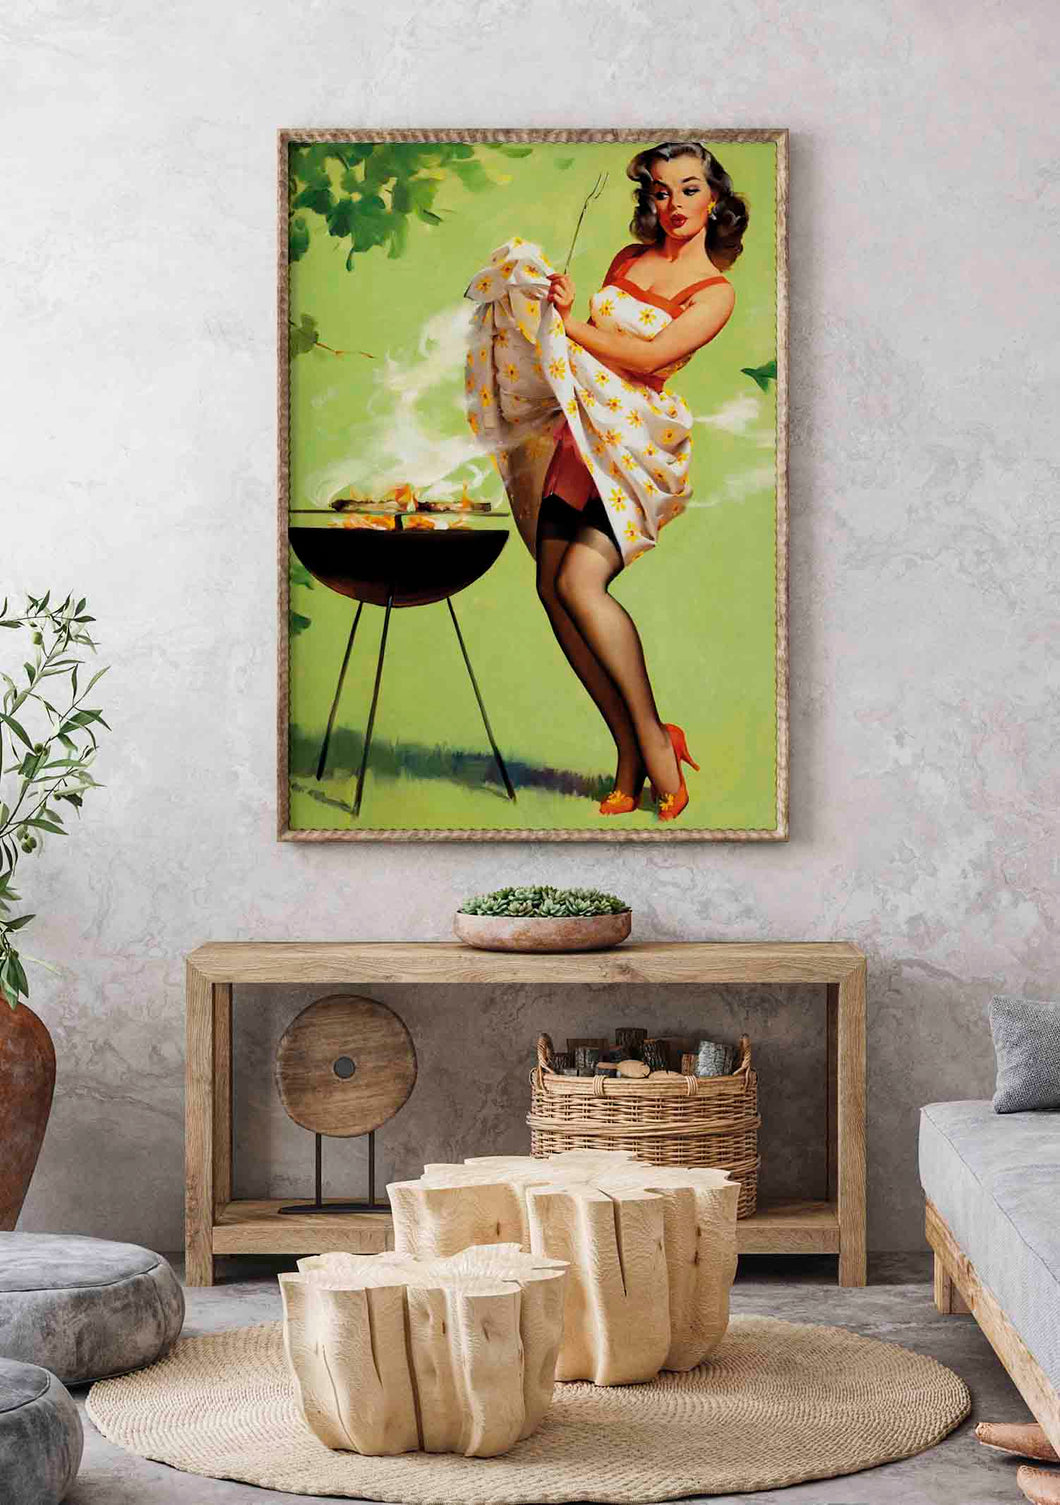 Barbecue Pin Up